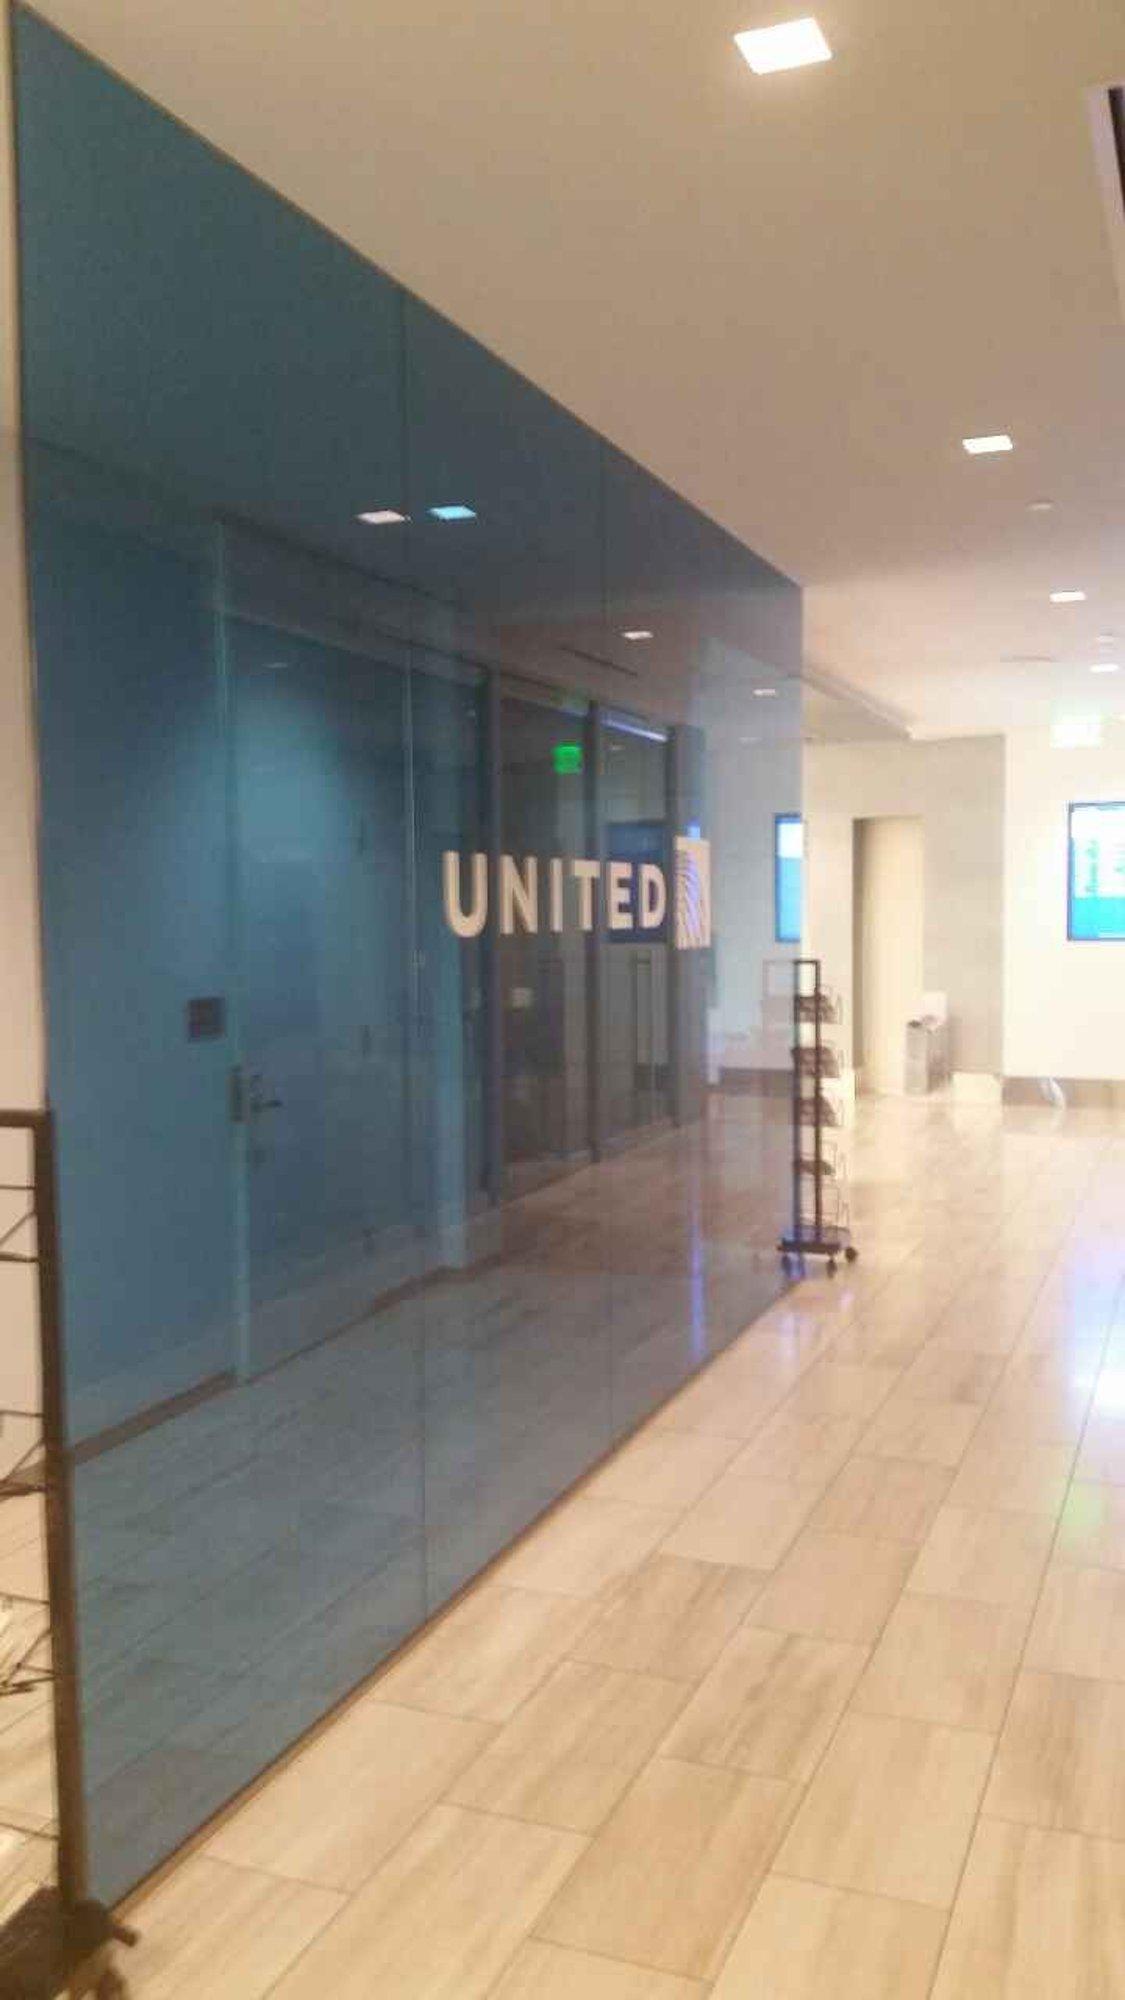 United Airlines United Club image 13 of 57